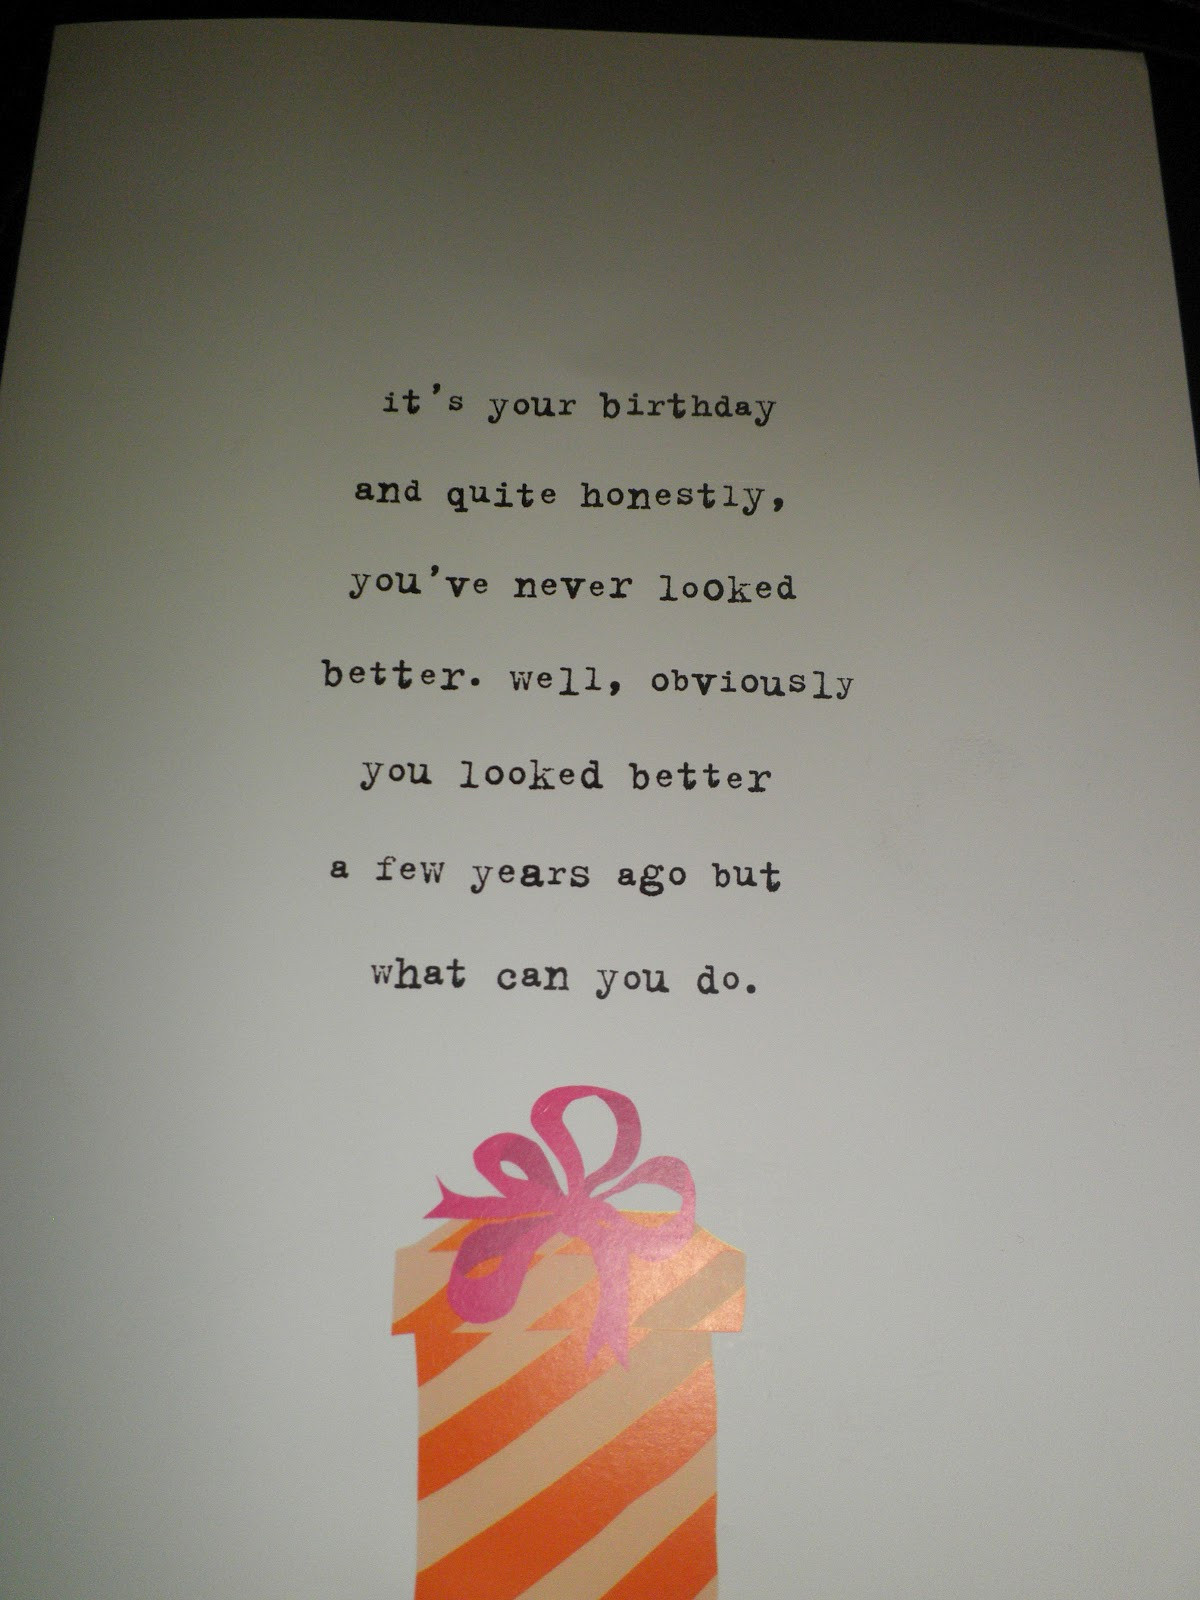 What To Write In A Birthday Card For Your Boyfriend
 Essay for your boyfriend